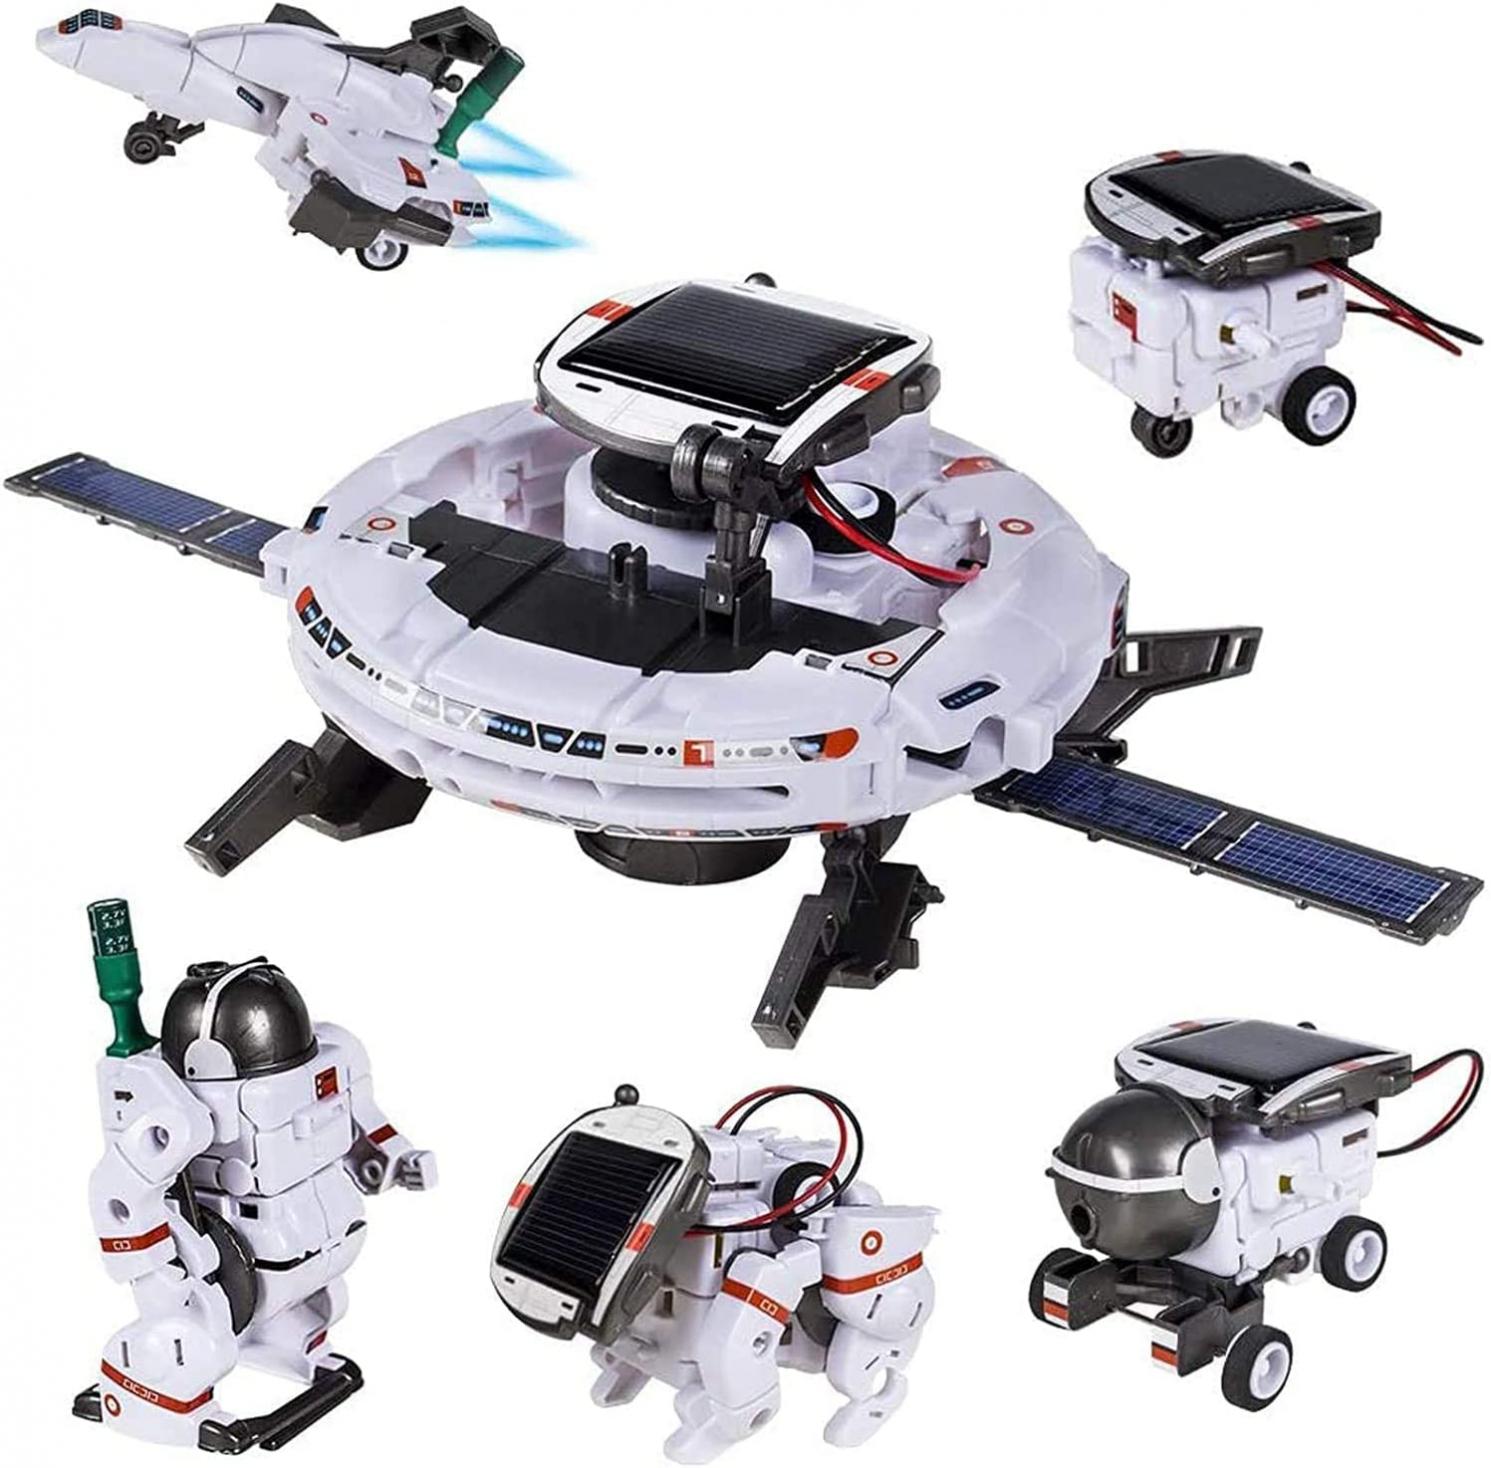 STEM Toys 6-in-1 Space Solar Robot Kit,Educatoinal Learning Science Building Toys DIY Educational Science Kits Gift for Kids Age 8 and Up,Science Experiment Set Gifts Toys for Boys Girls Teens